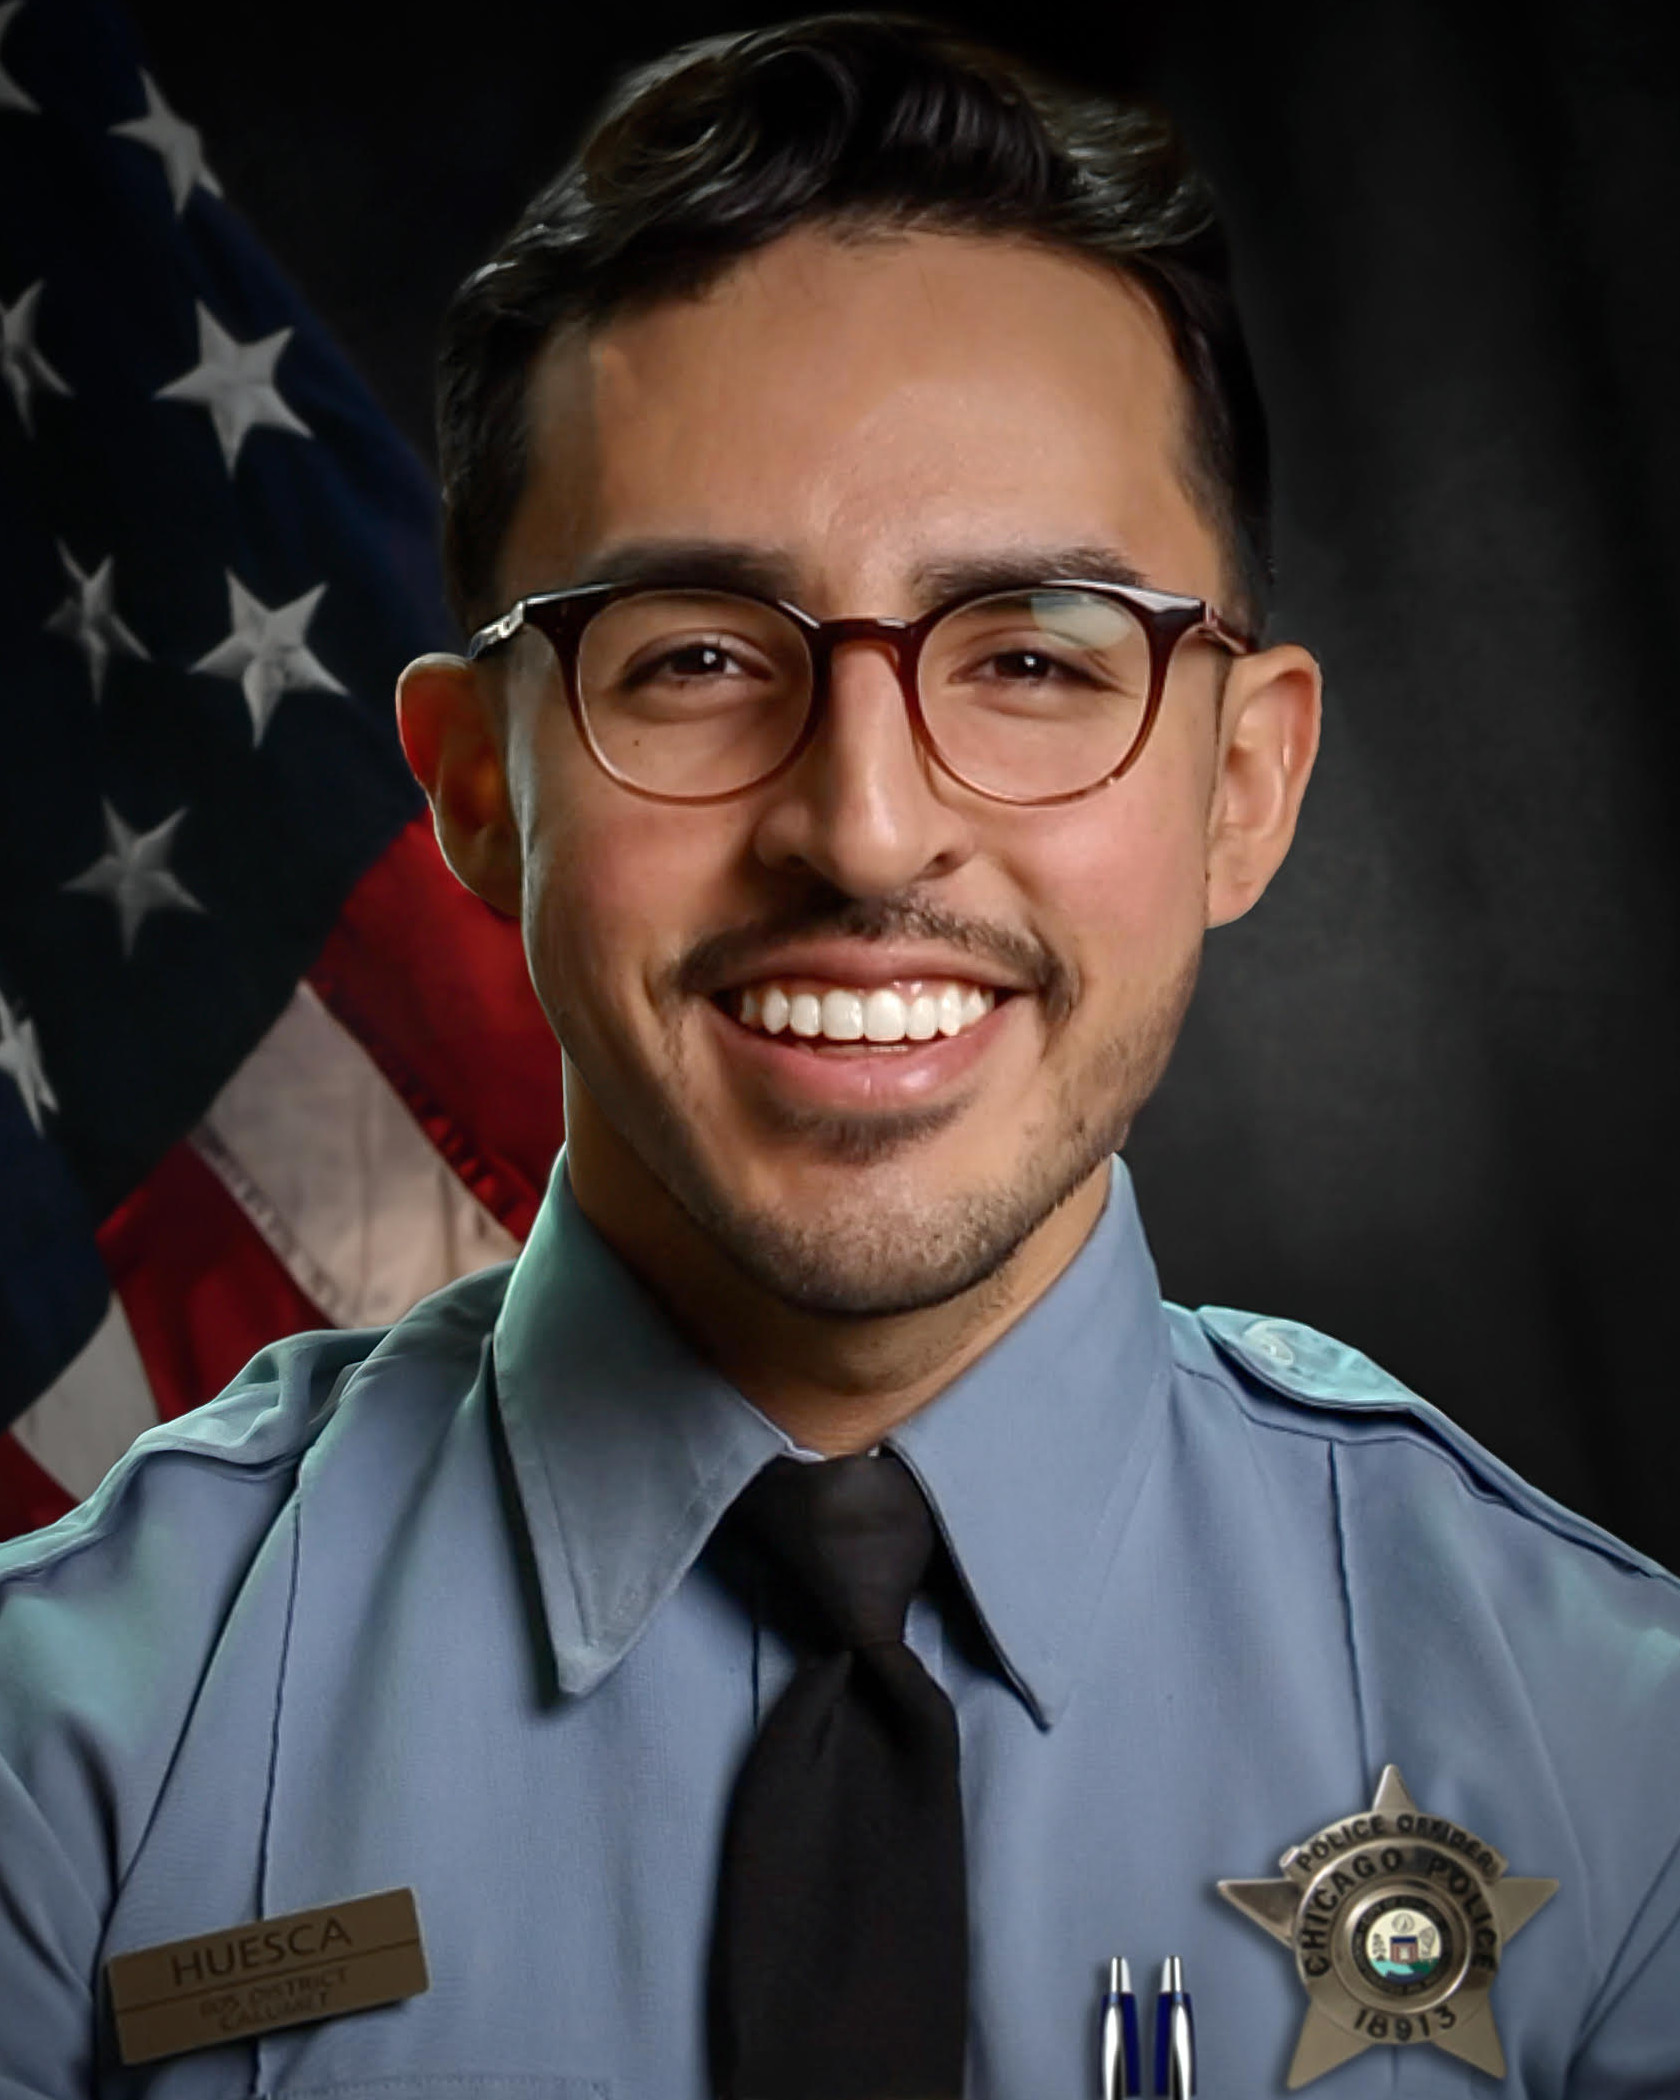 Police Officer Luis M. Huesca | Chicago Police Department, Illinois